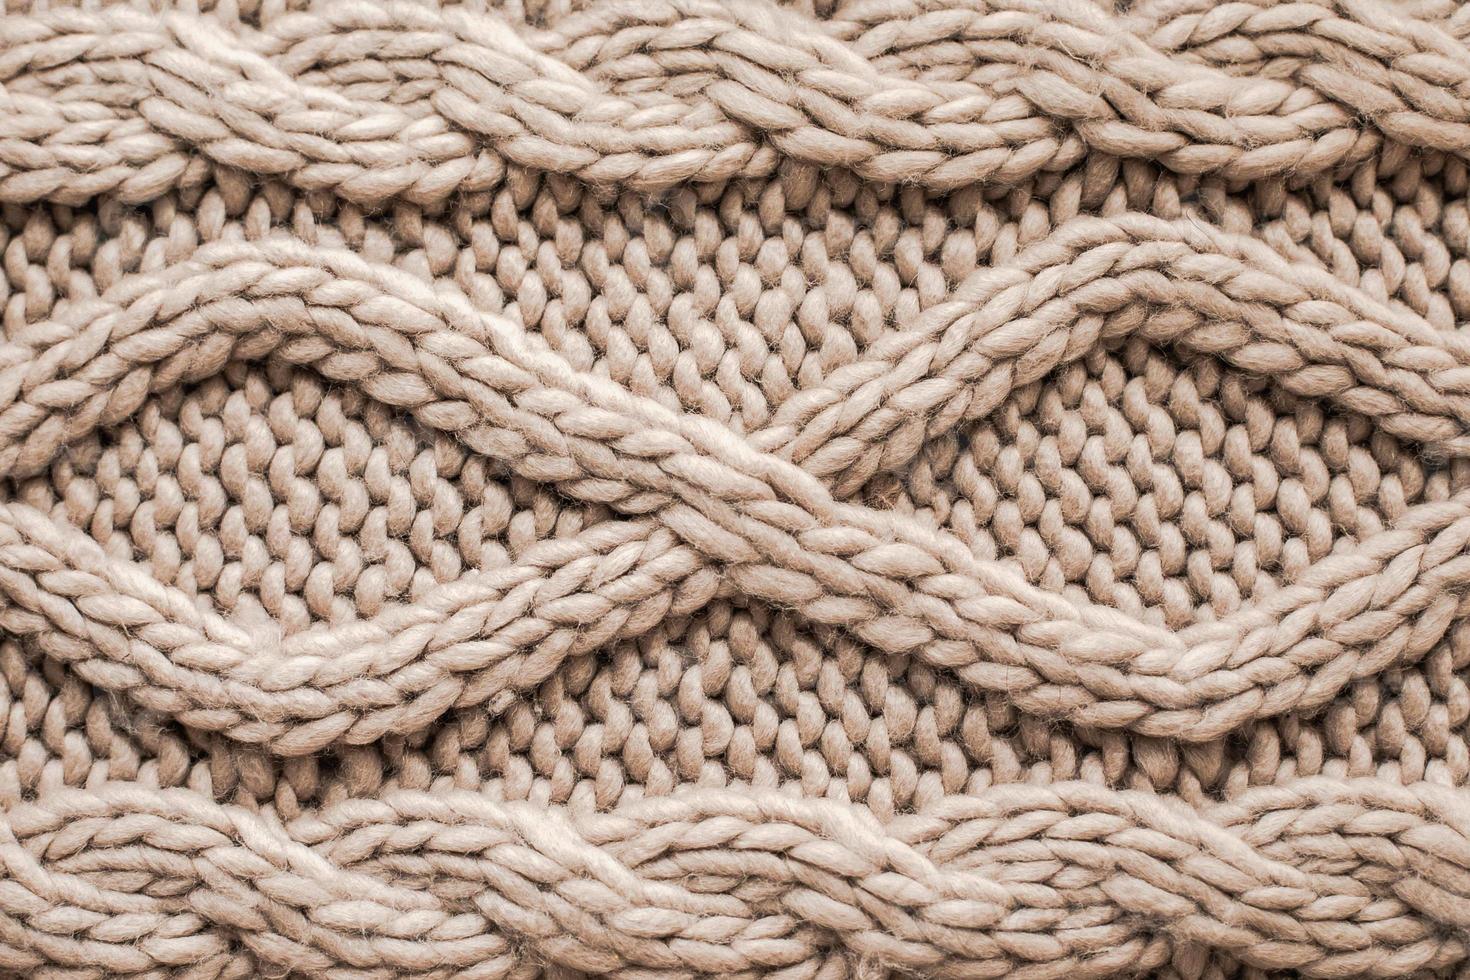 https://static.vecteezy.com/system/resources/previews/017/109/287/non_2x/beige-knitting-wool-texture-background-woolen-handmade-knitted-clothes-texture-photo.jpg